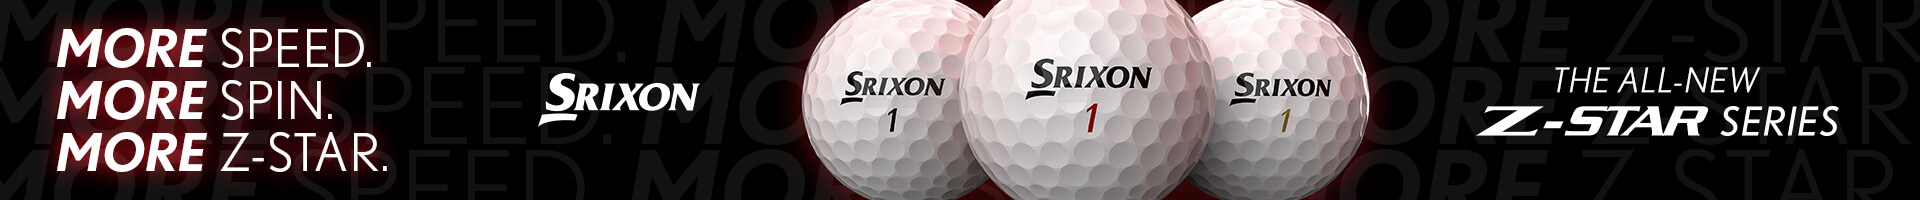 Srixon Z-Star Series 8 Now Available